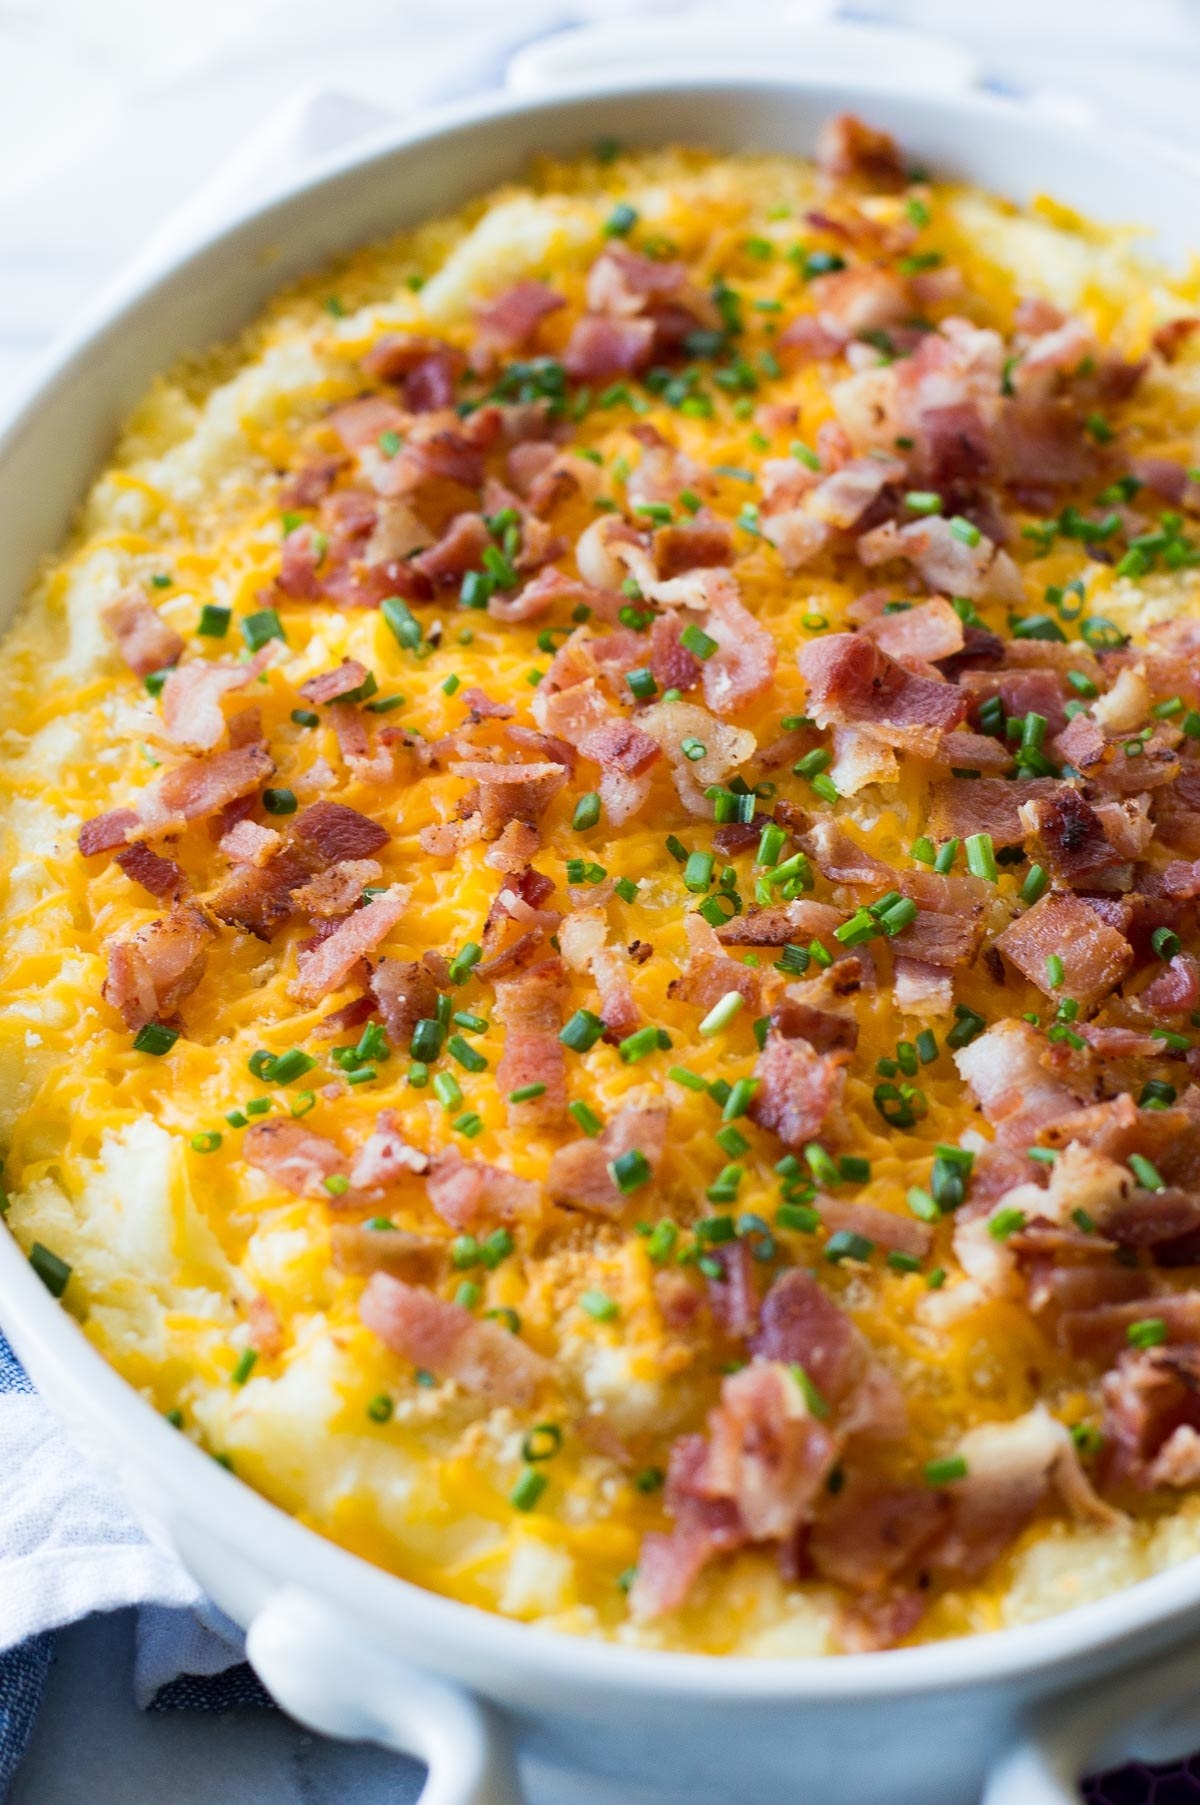 15 Picture-Perfect Casseroles That'll Keep You Full And Cozy